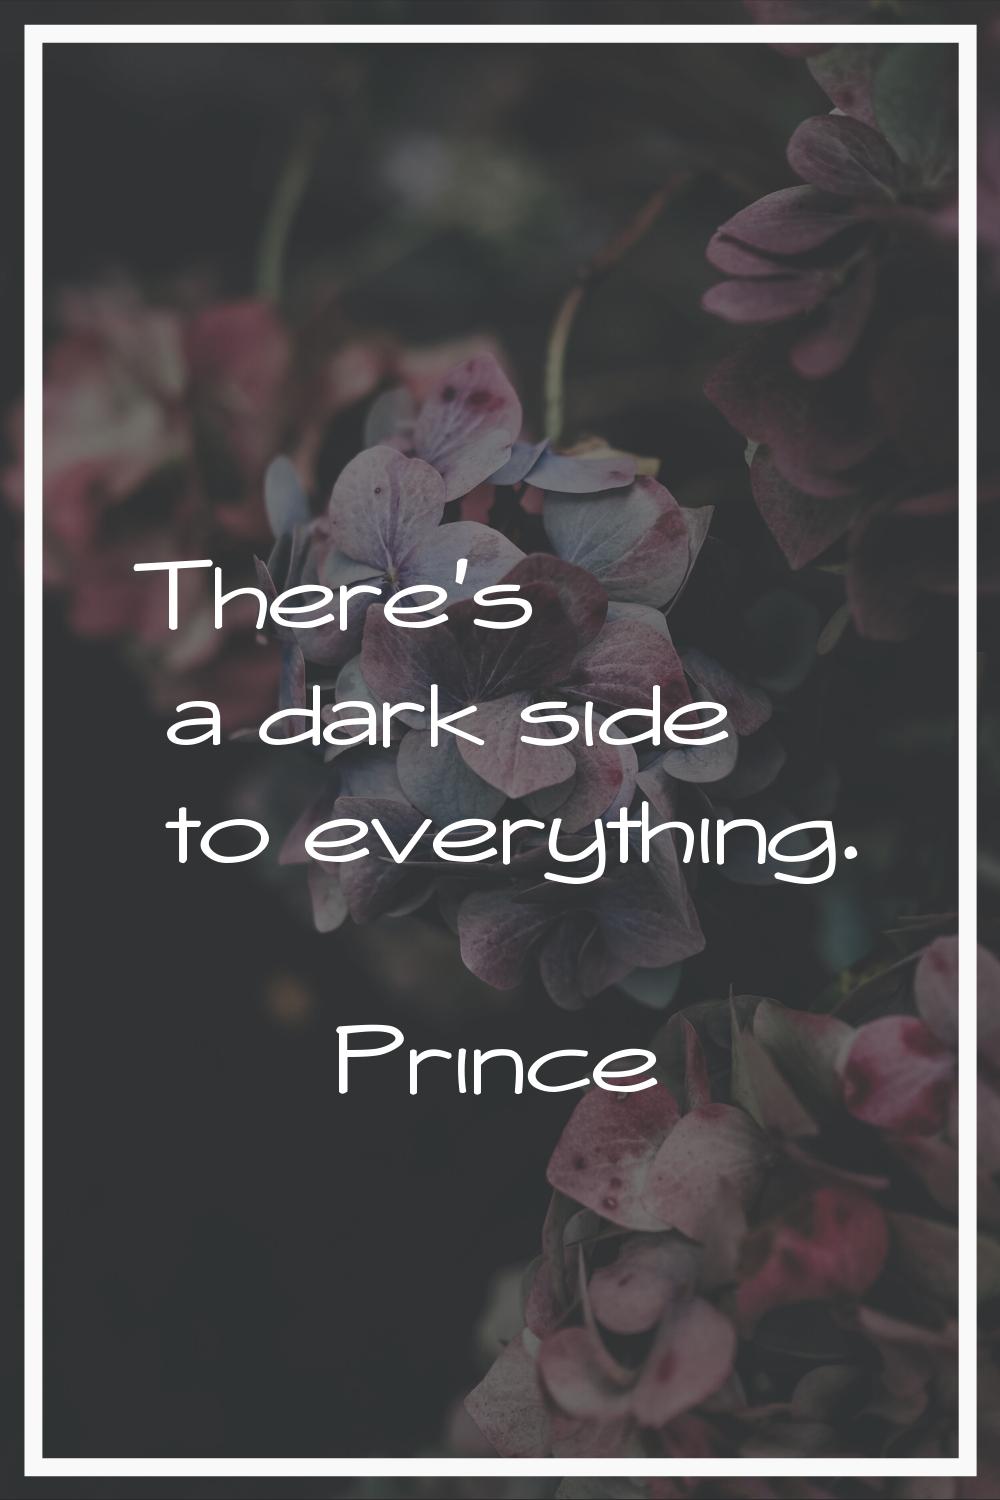 There's a dark side to everything.